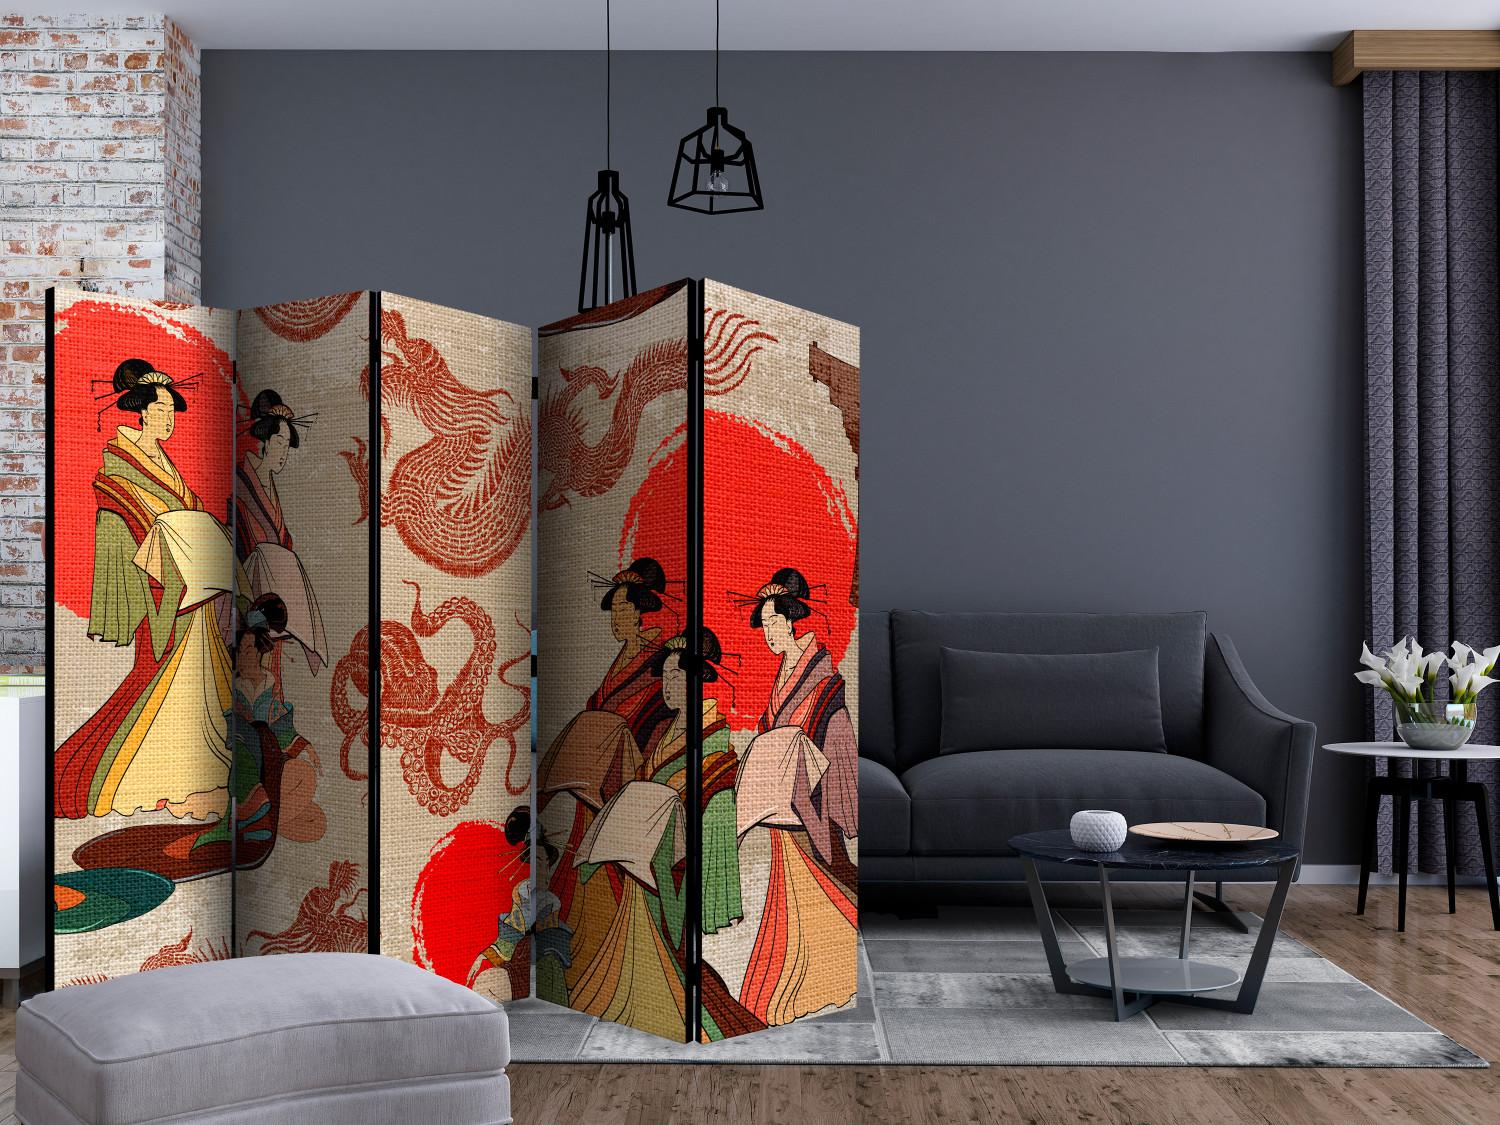 Room Divider Geishas II (5-piece) - oriental composition with silhouettes of women